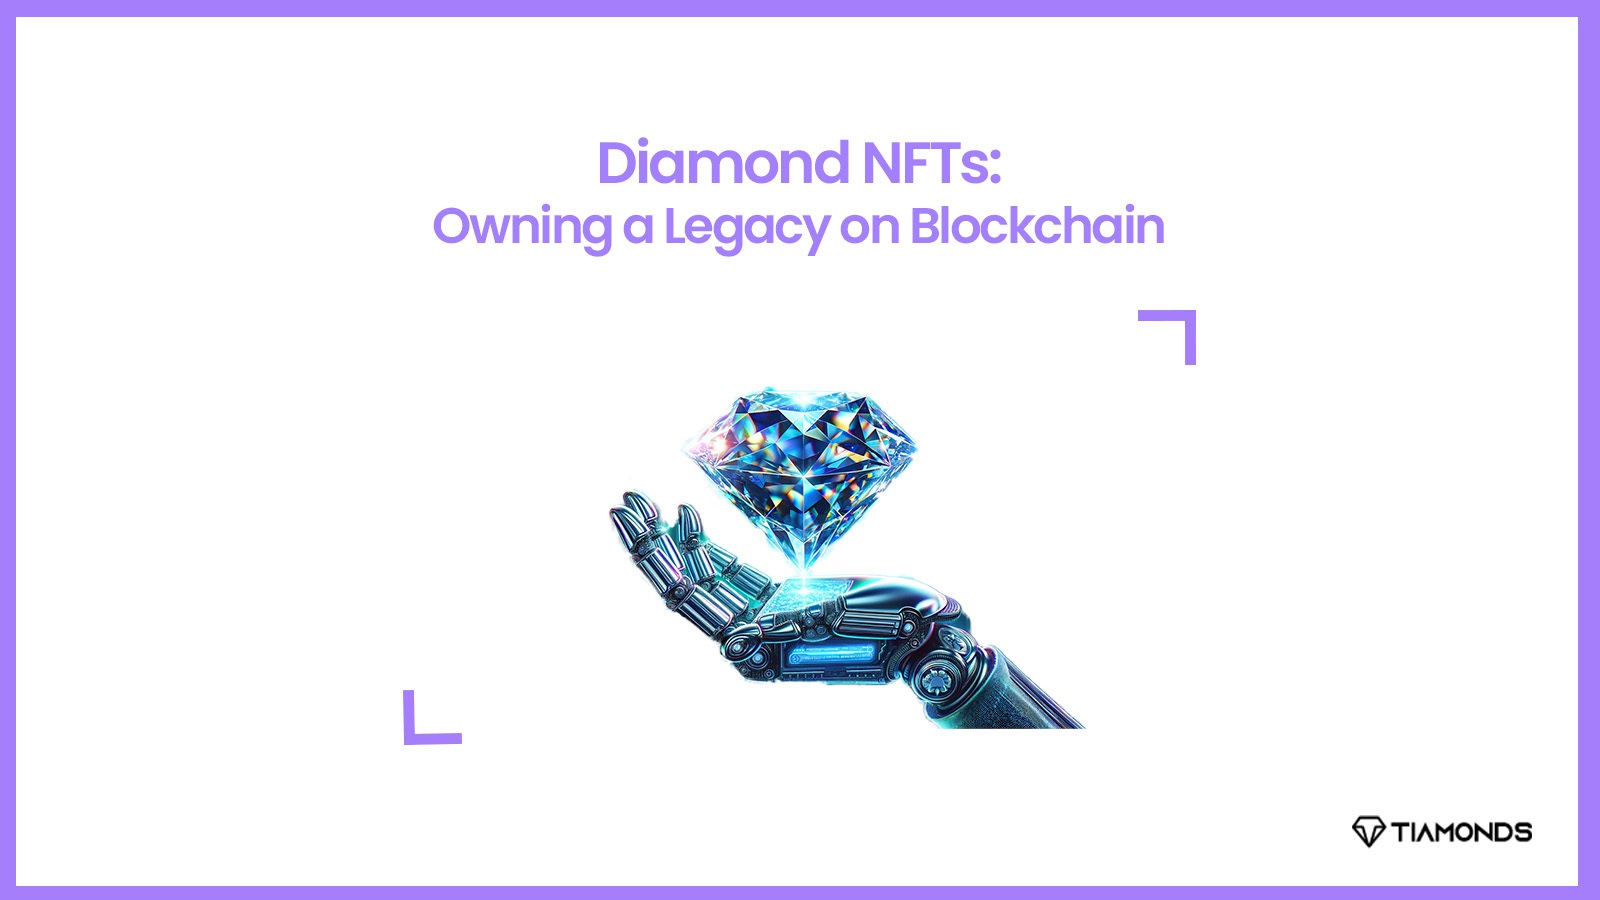 Diamond NFTs: The Next Generation of Digital Assets for Collectors